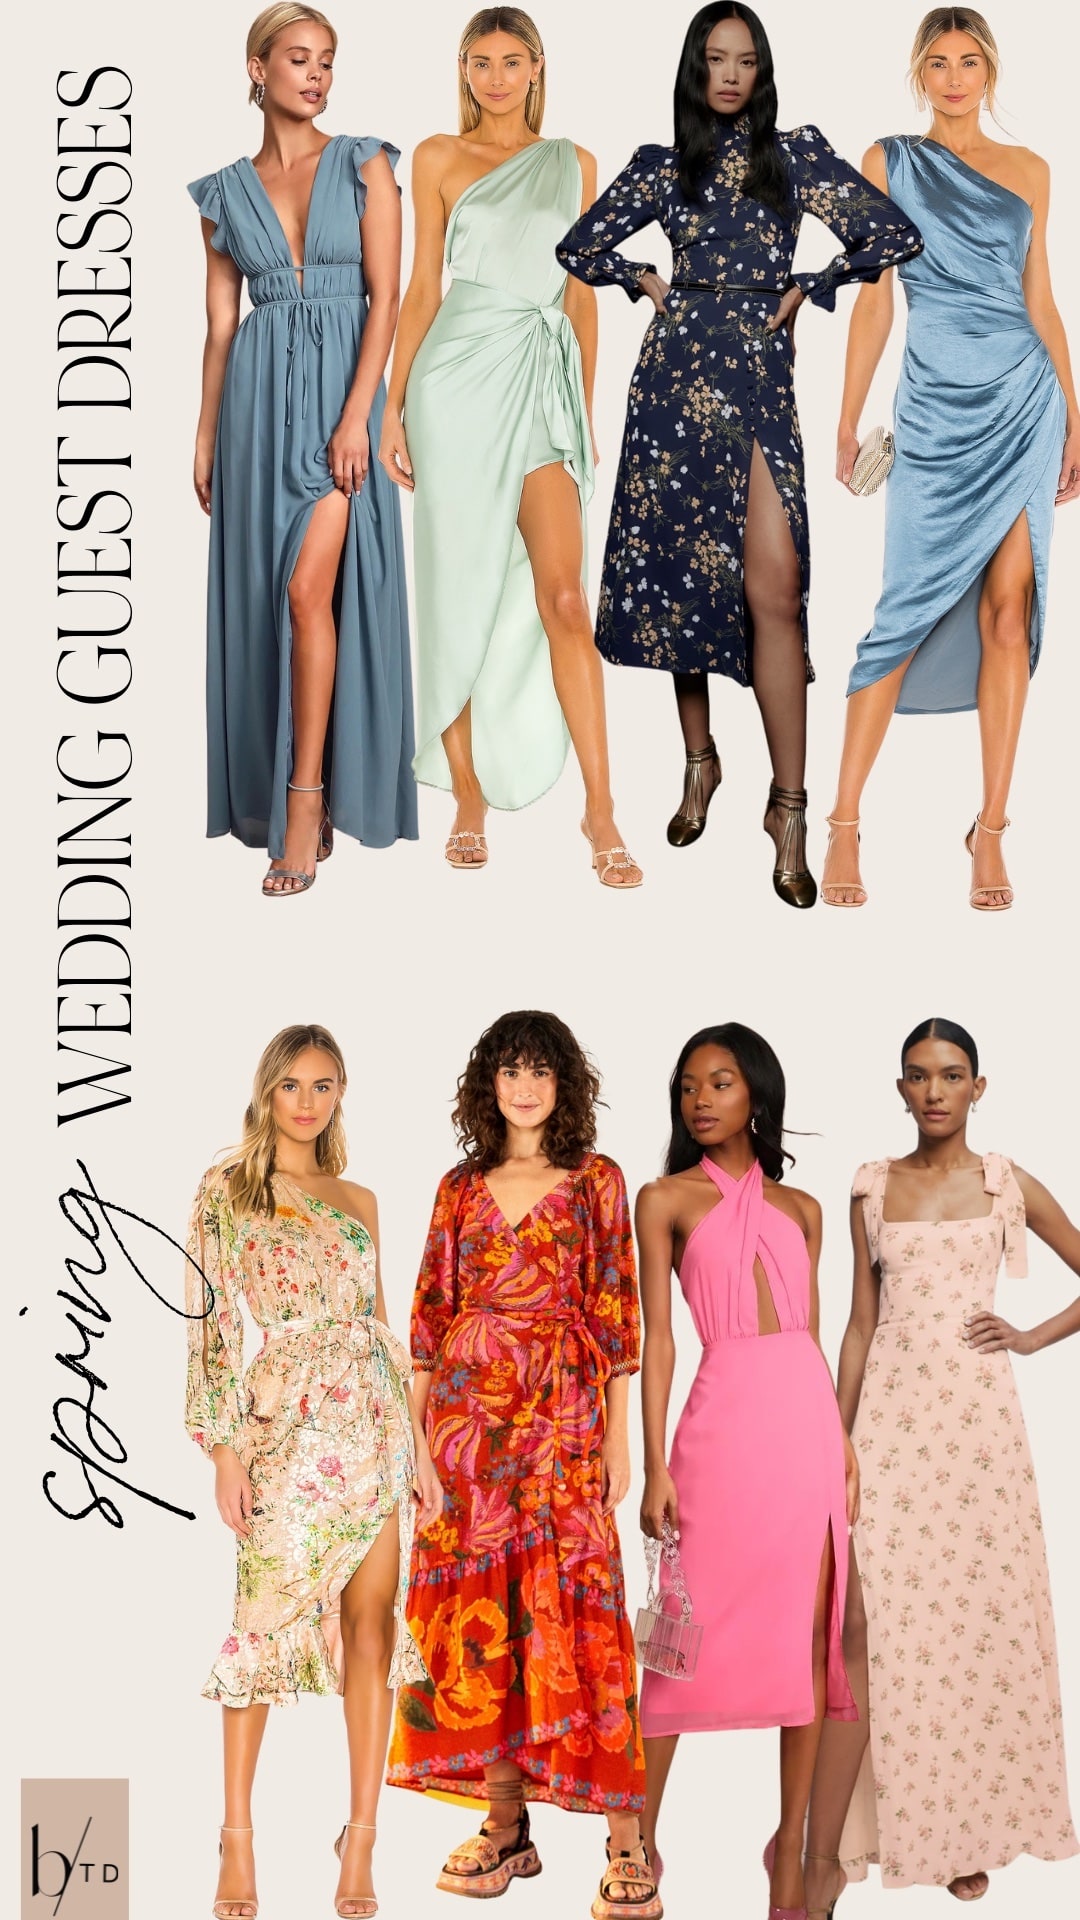 15 Summer Wedding Guest Outfits, Part 2 - Perfete